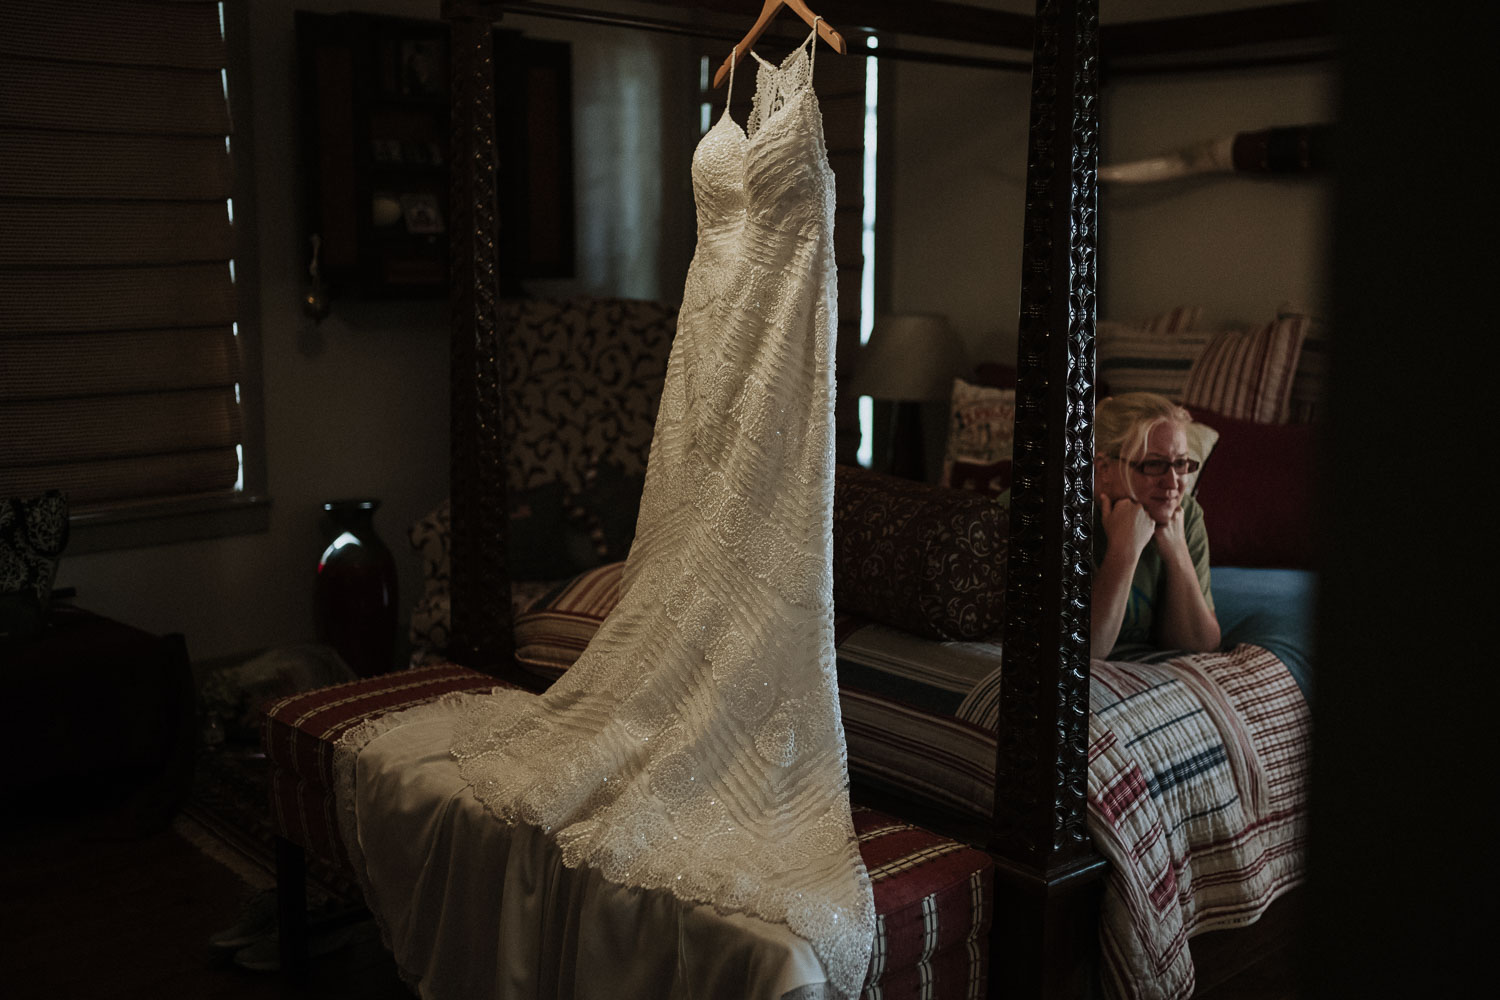 Dress hangs from four poster bed as guest lies on bed